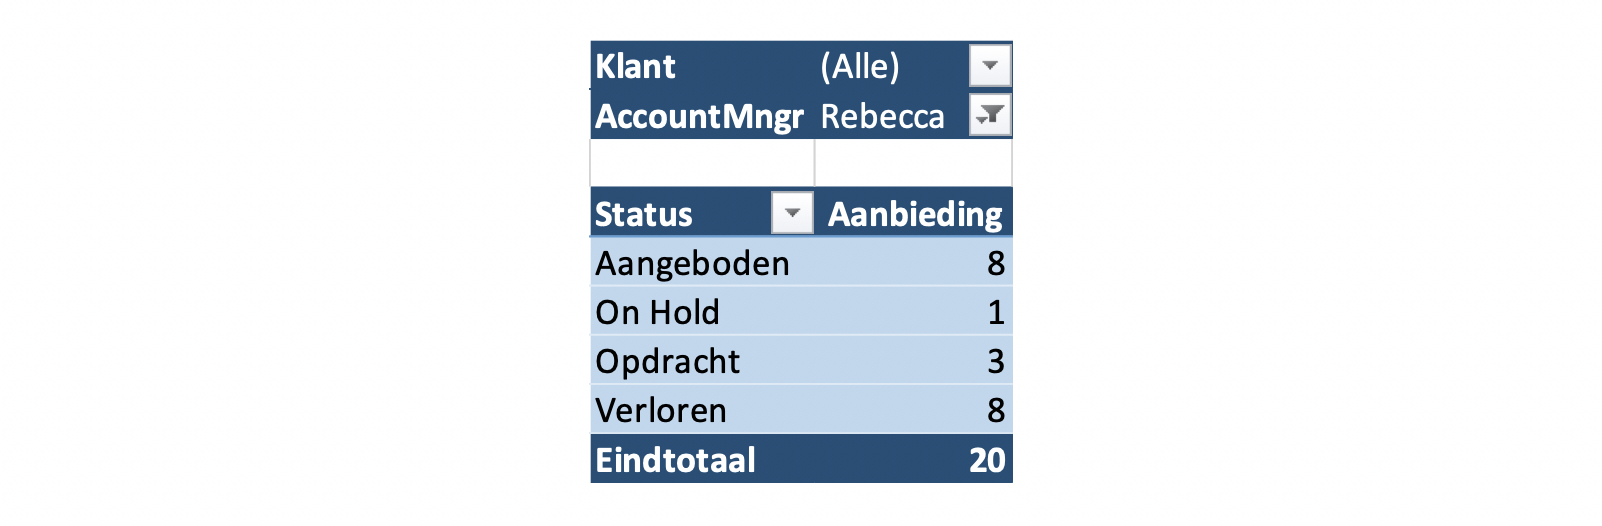 Tabel-05-Accountmanagers